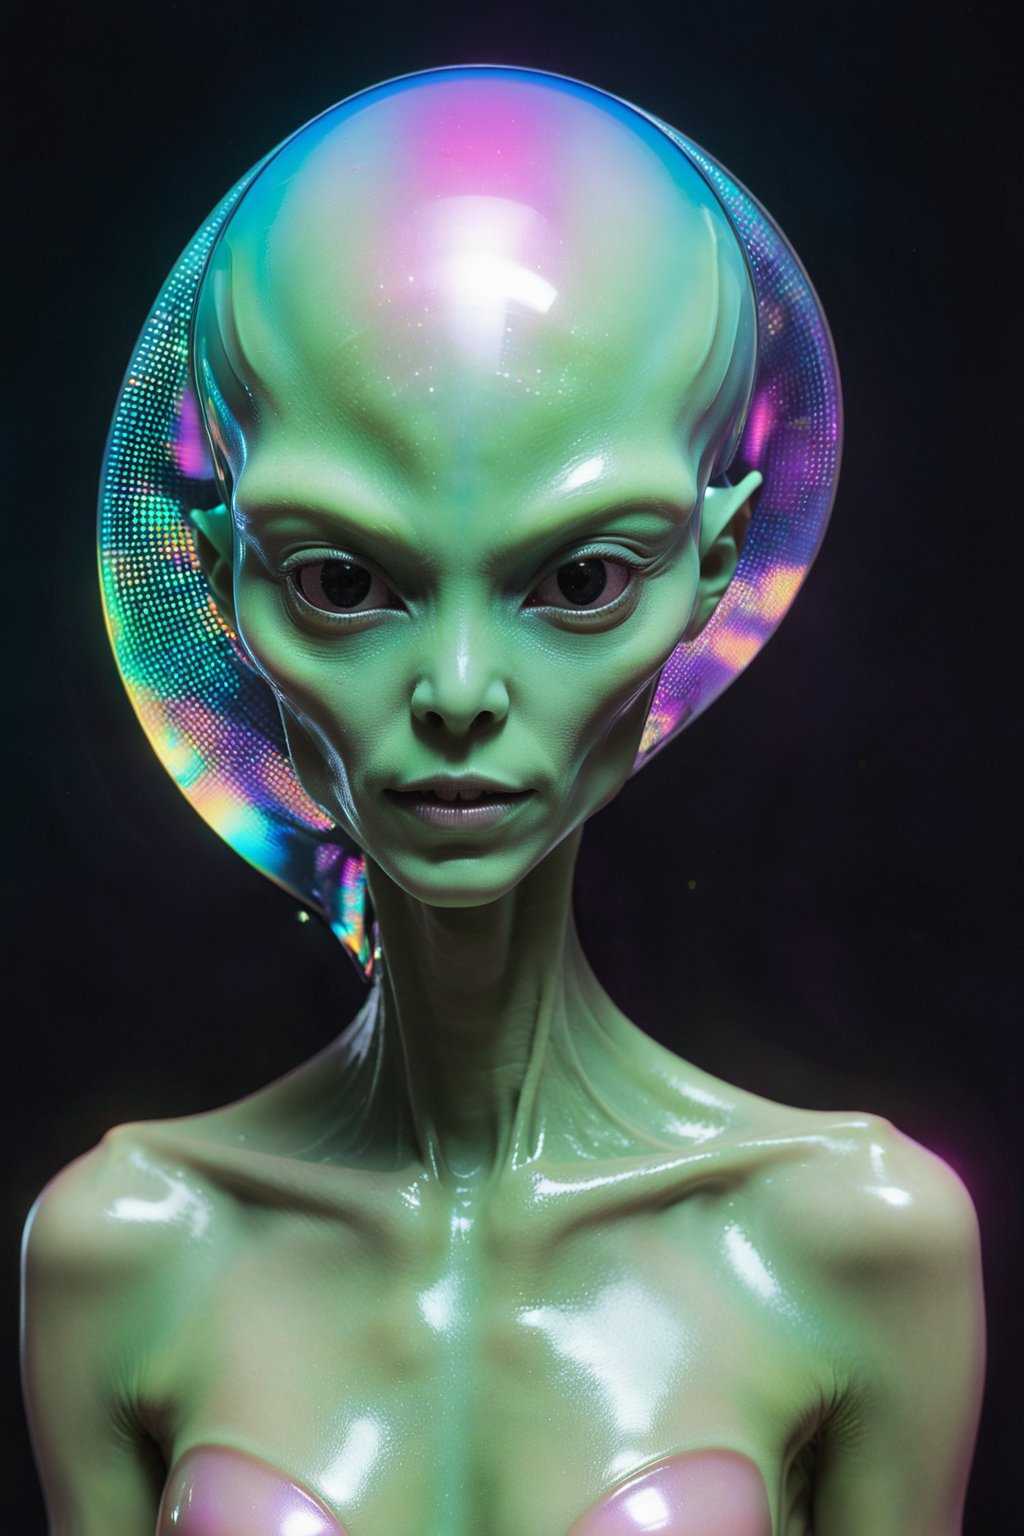 Create a photogenic Instagram alien, featuring a body covered in mini-screens displaying photos and a face that morphs into different filters. It should have a holographic, vibrant appearance